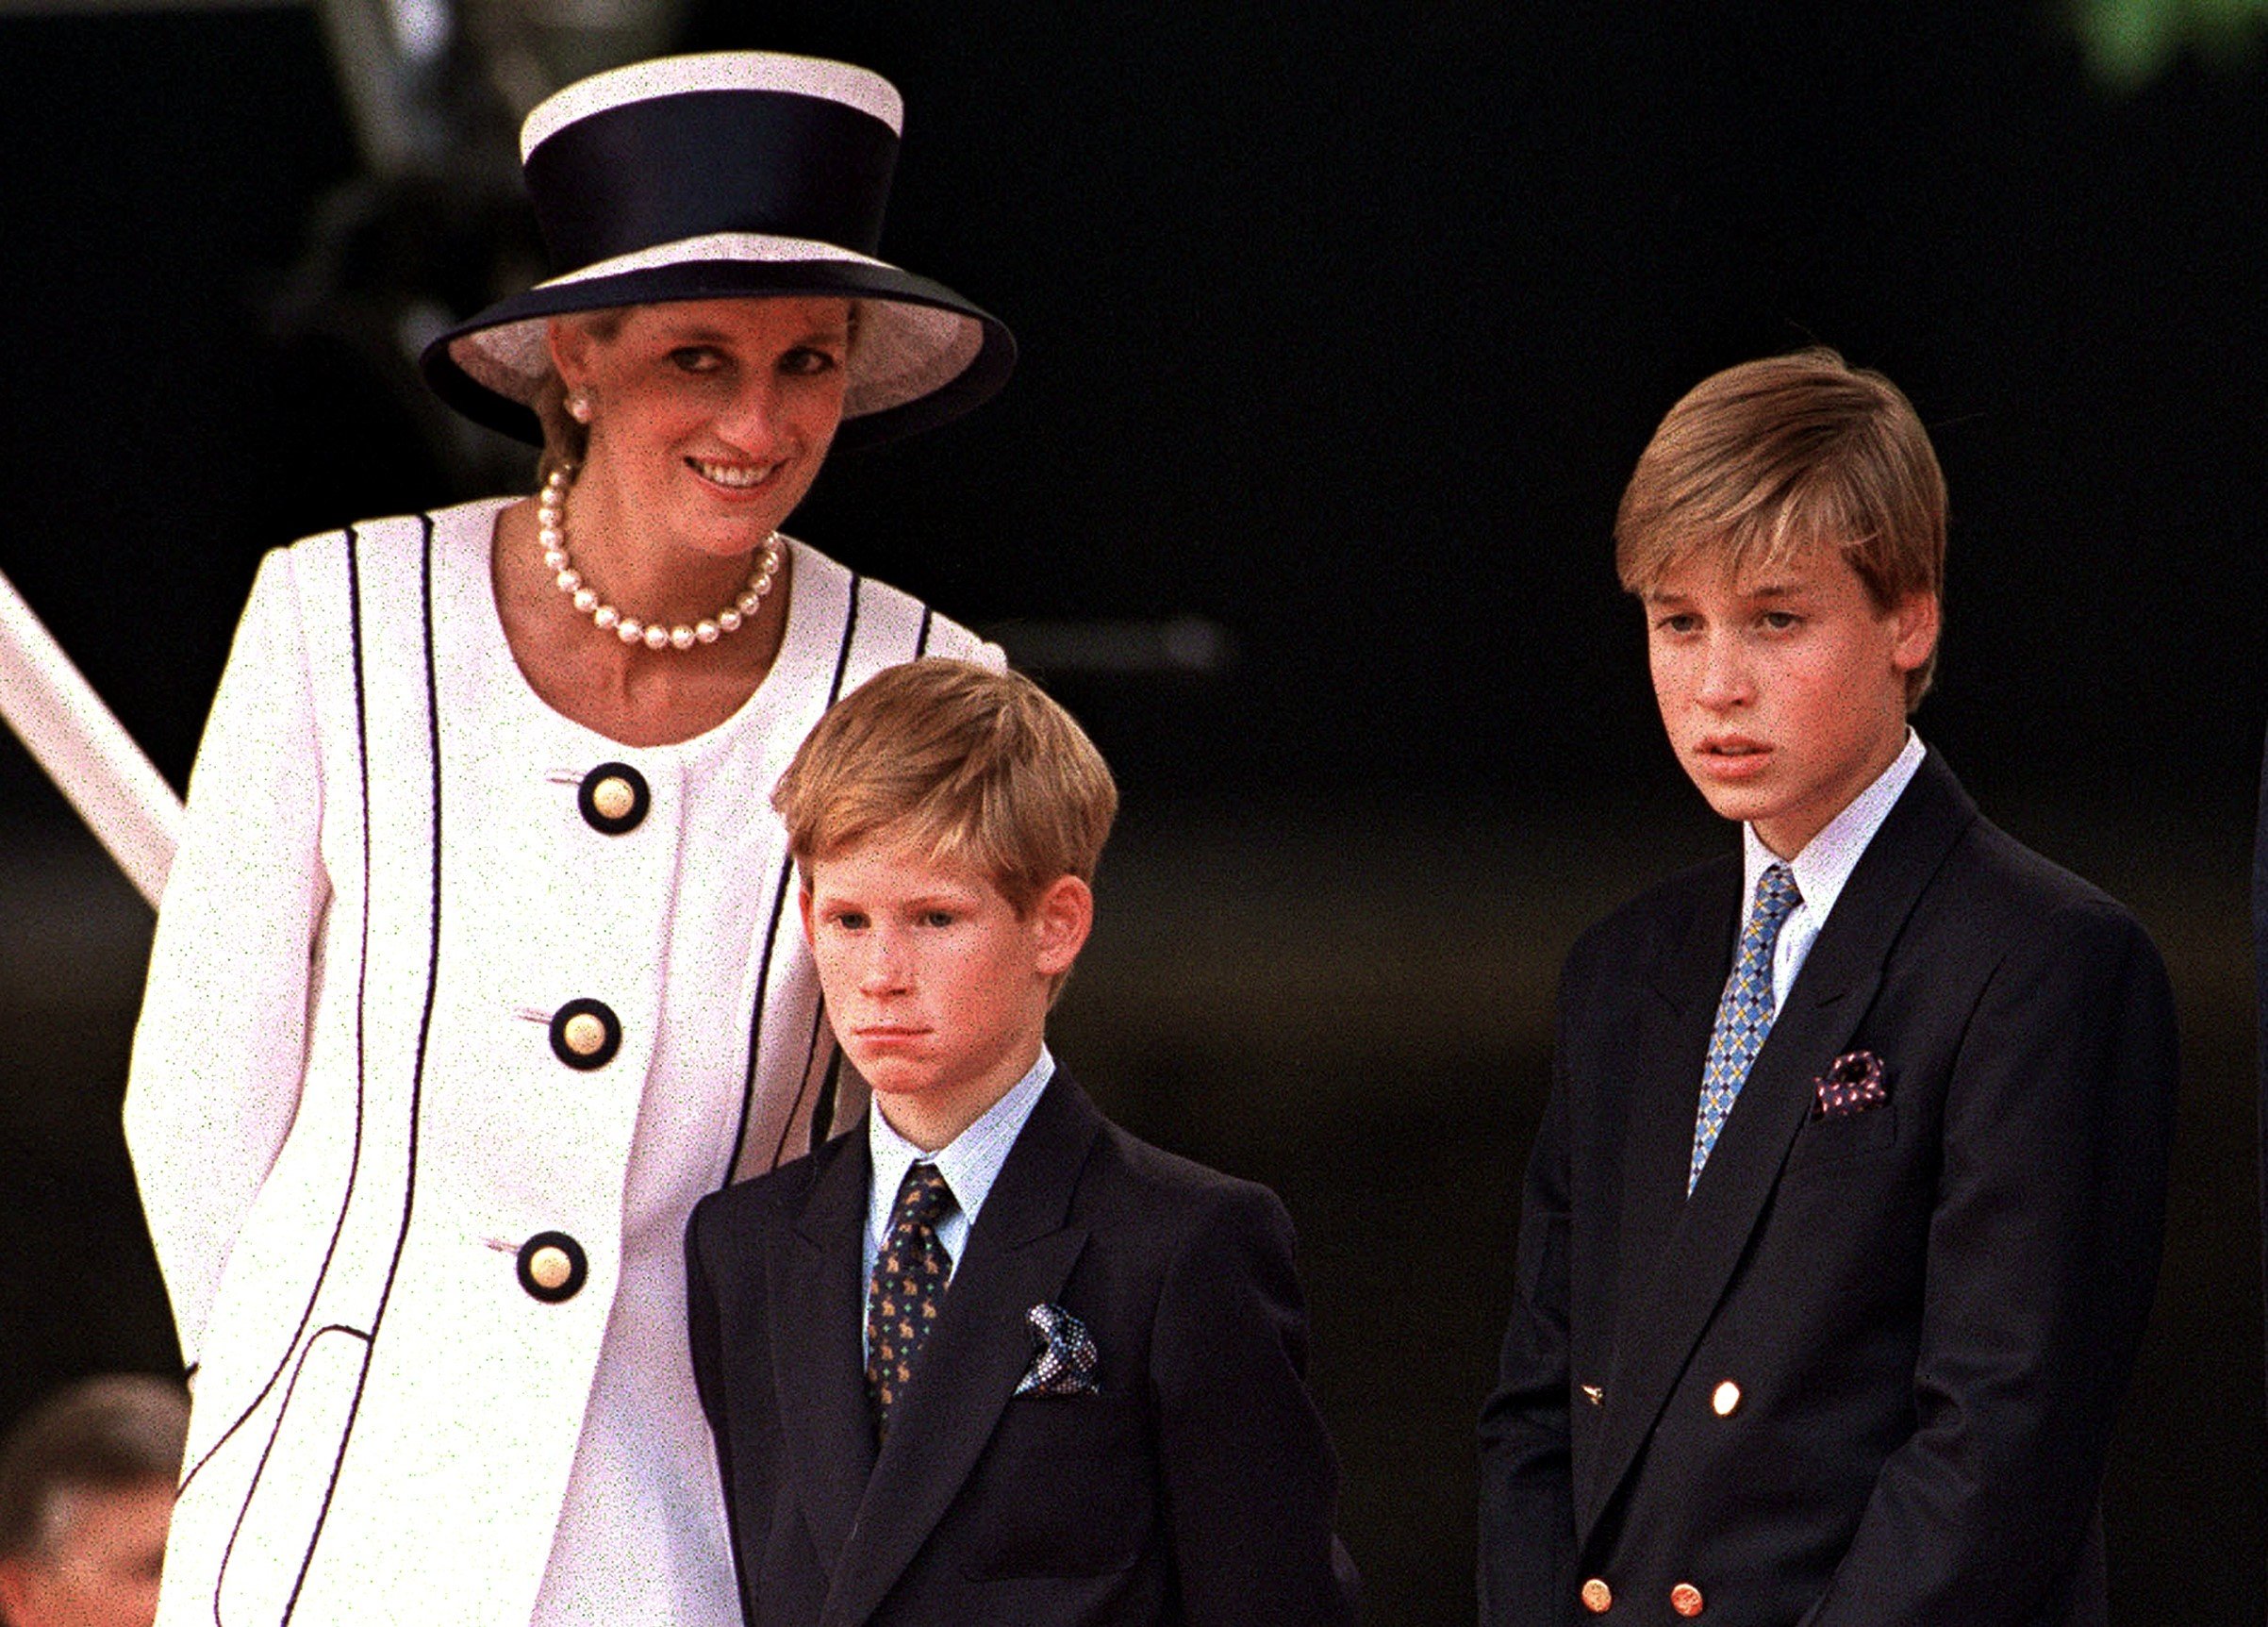 Prince Harry and Prince William dressed in suits next to Princess Diana wearing a white-and-black outfit with a fascinator at a parade on V.J. Day in 1994